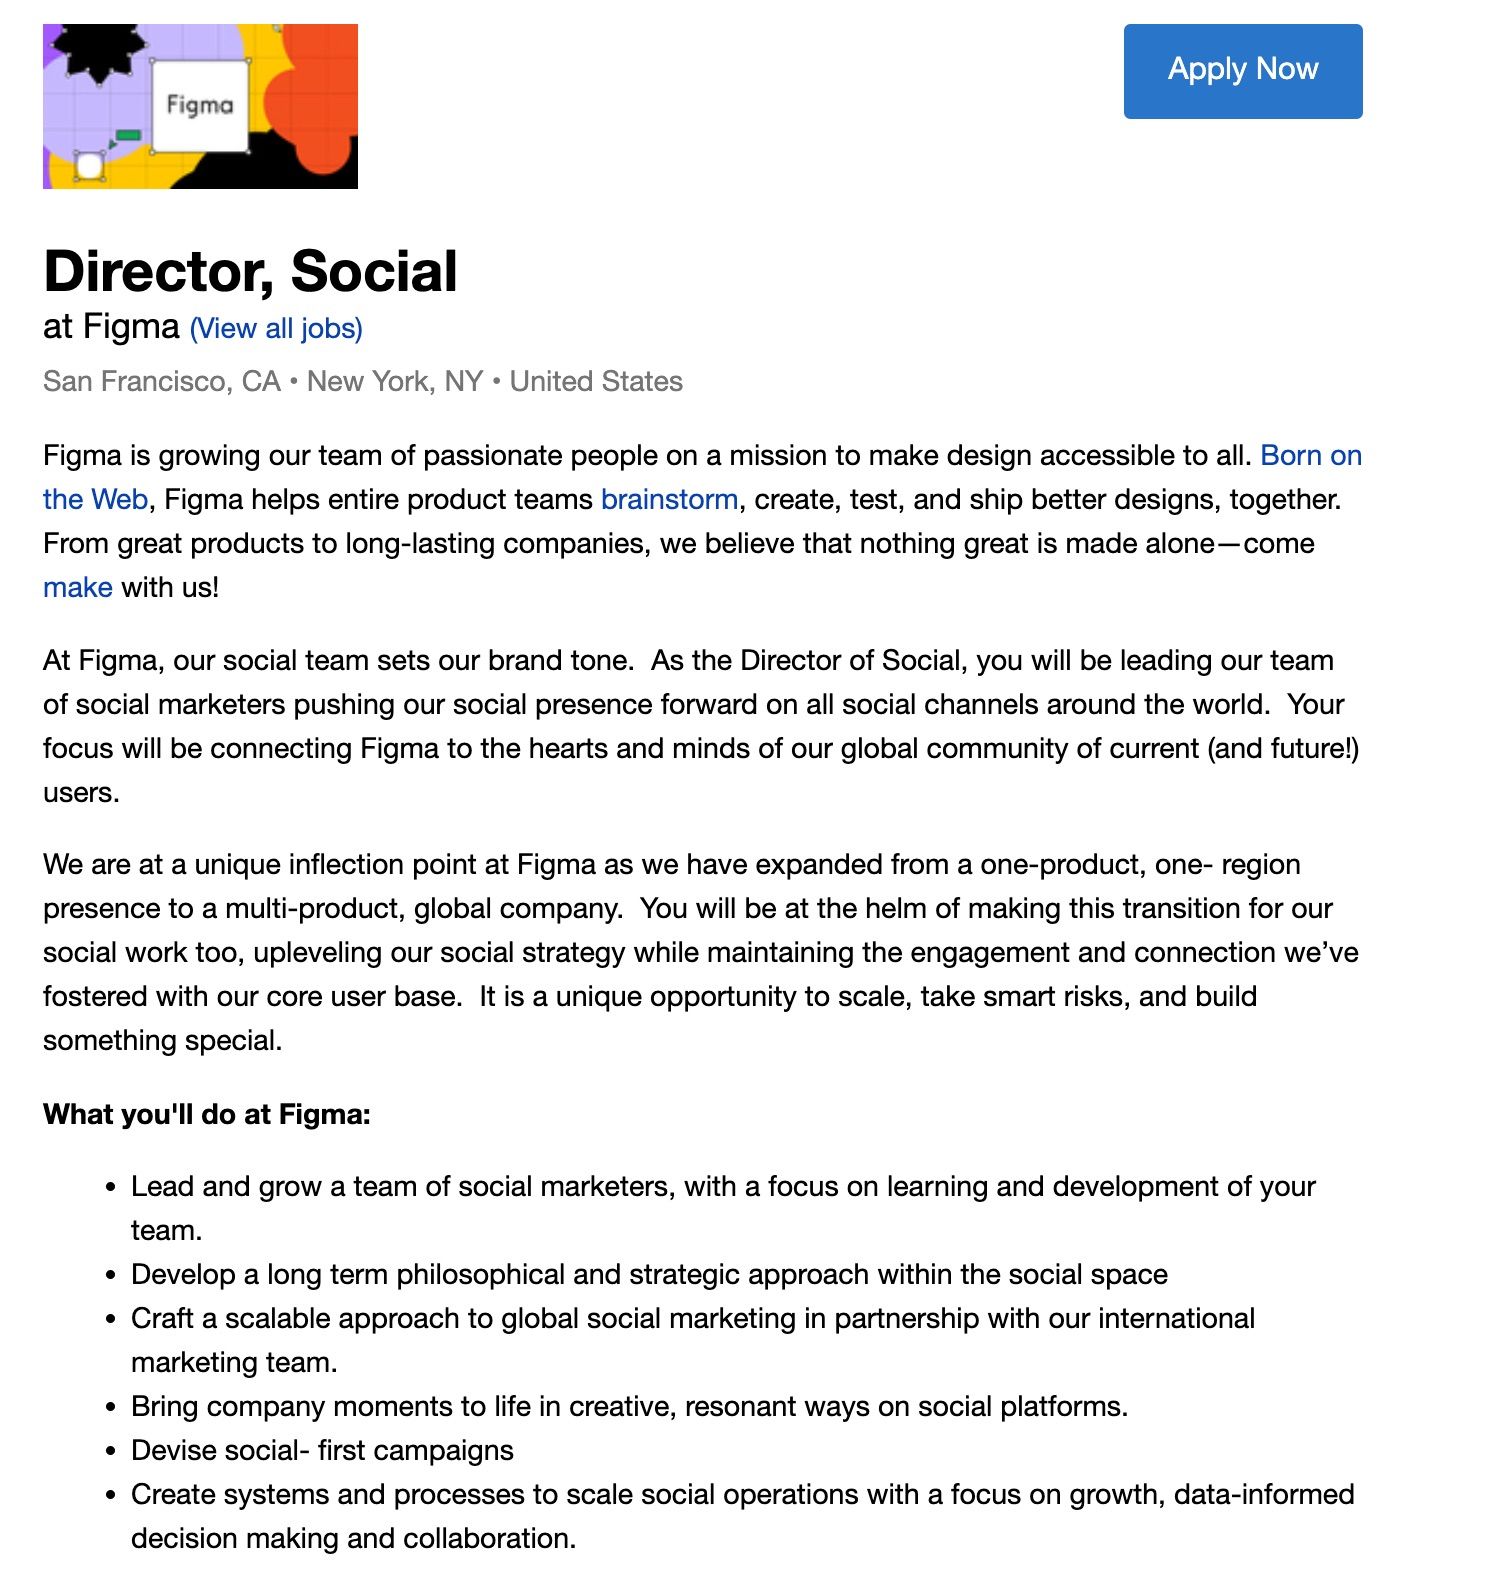 Job Application for Director  Social at Figma - What You Need To Know About Building A Social Media Career